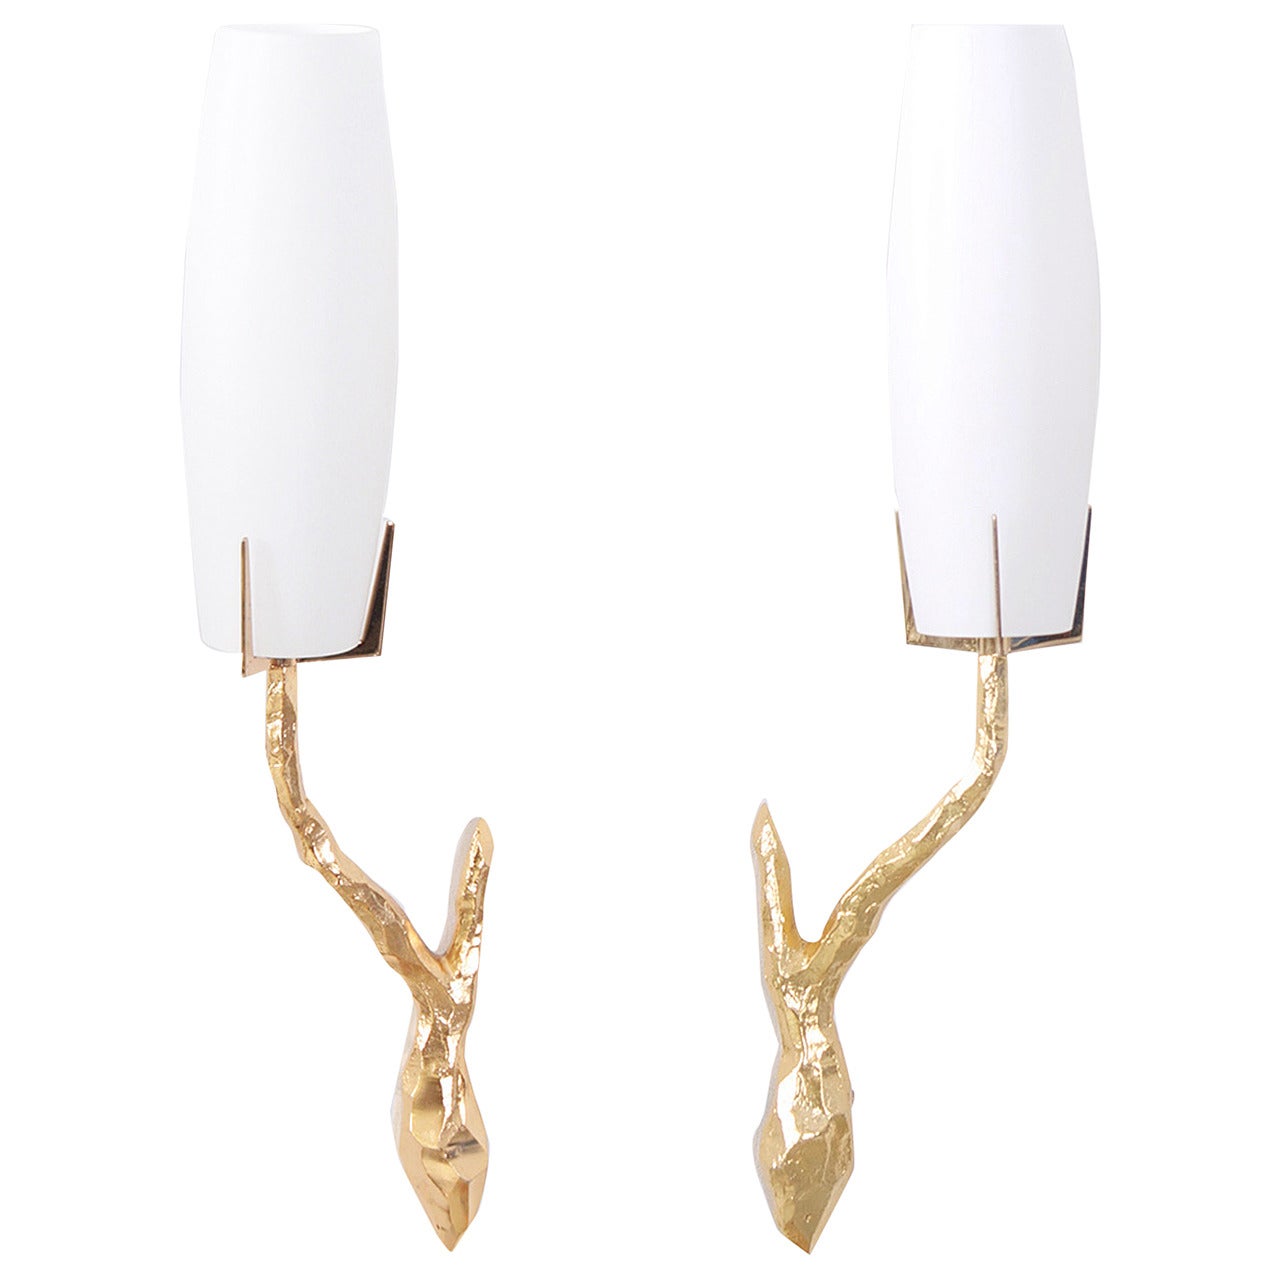 Pair of Bronze Sconces Lamps for Maison Arlus in Manner of Felix Agostini